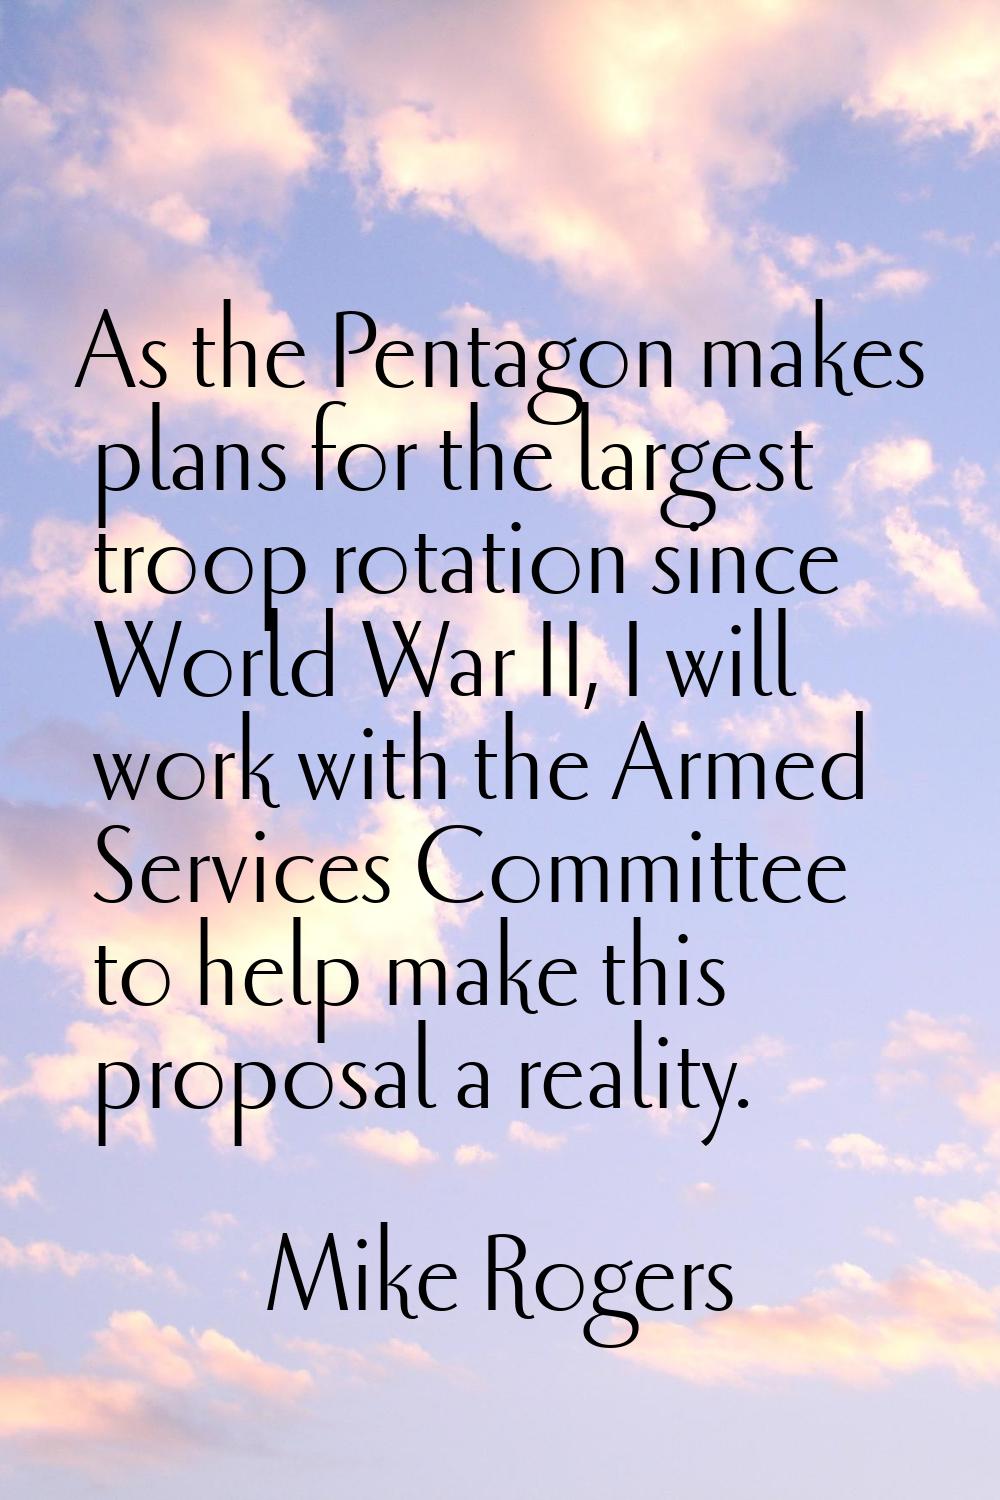 As the Pentagon makes plans for the largest troop rotation since World War II, I will work with the